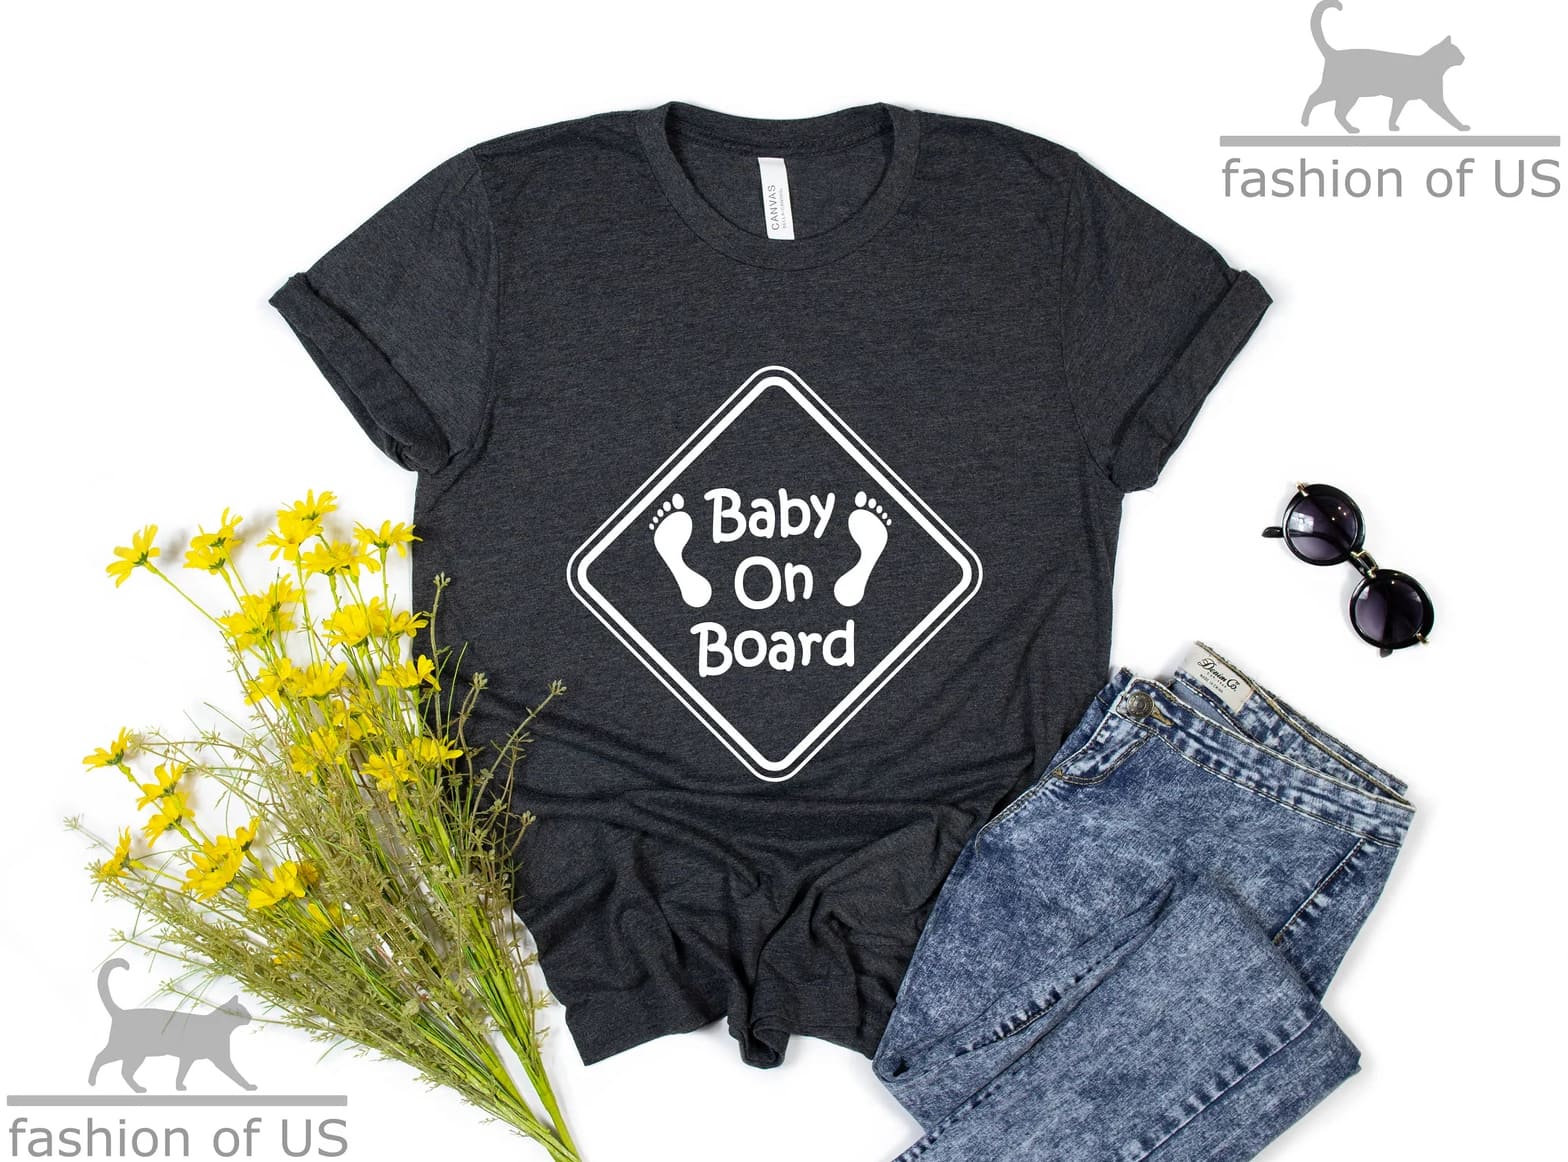 Black pregnancy announcement t-shirt with jeans and sunglasses 